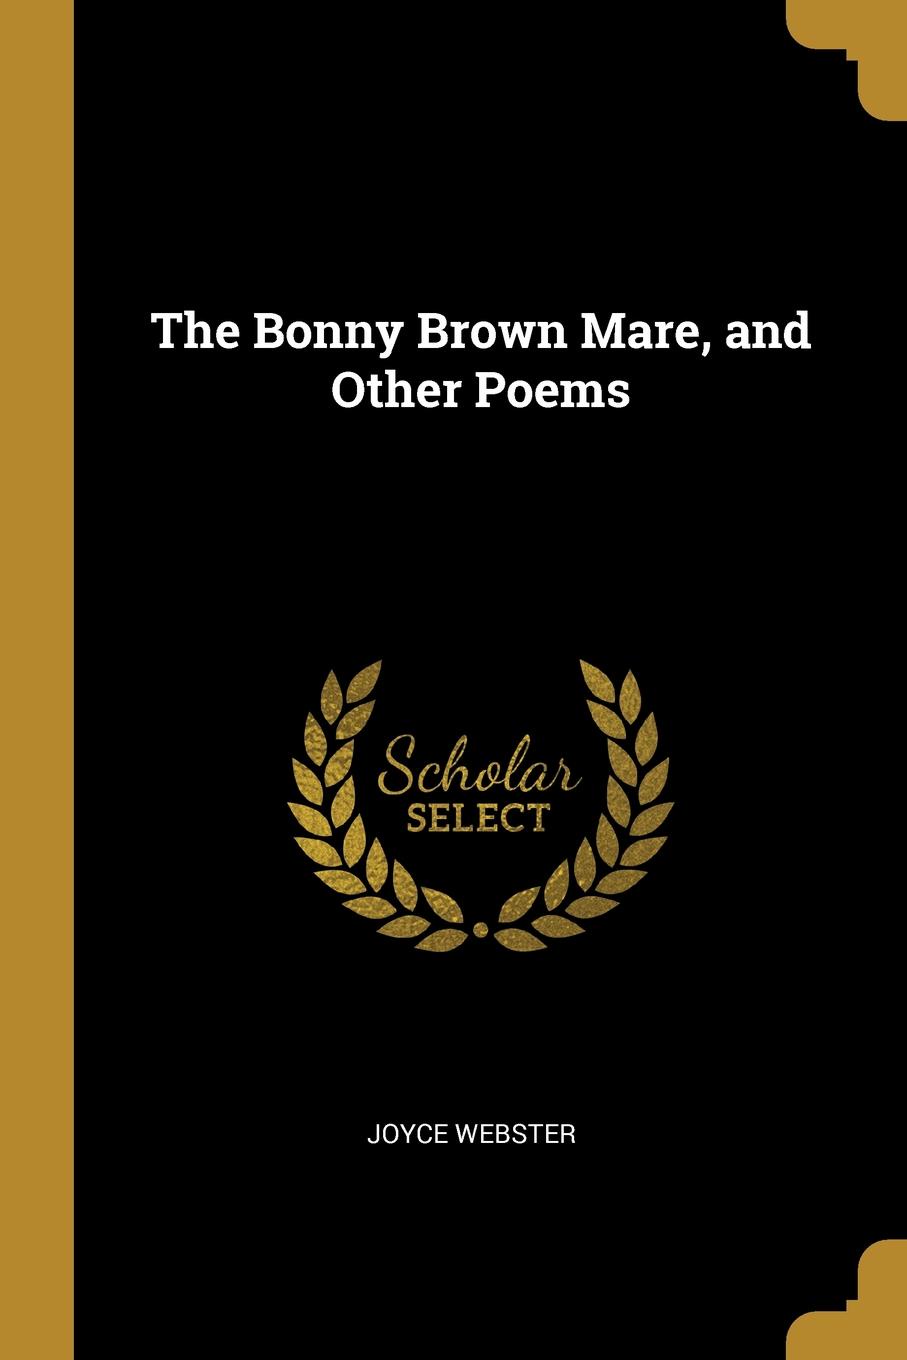 The Bonny Brown Mare, and Other Poems